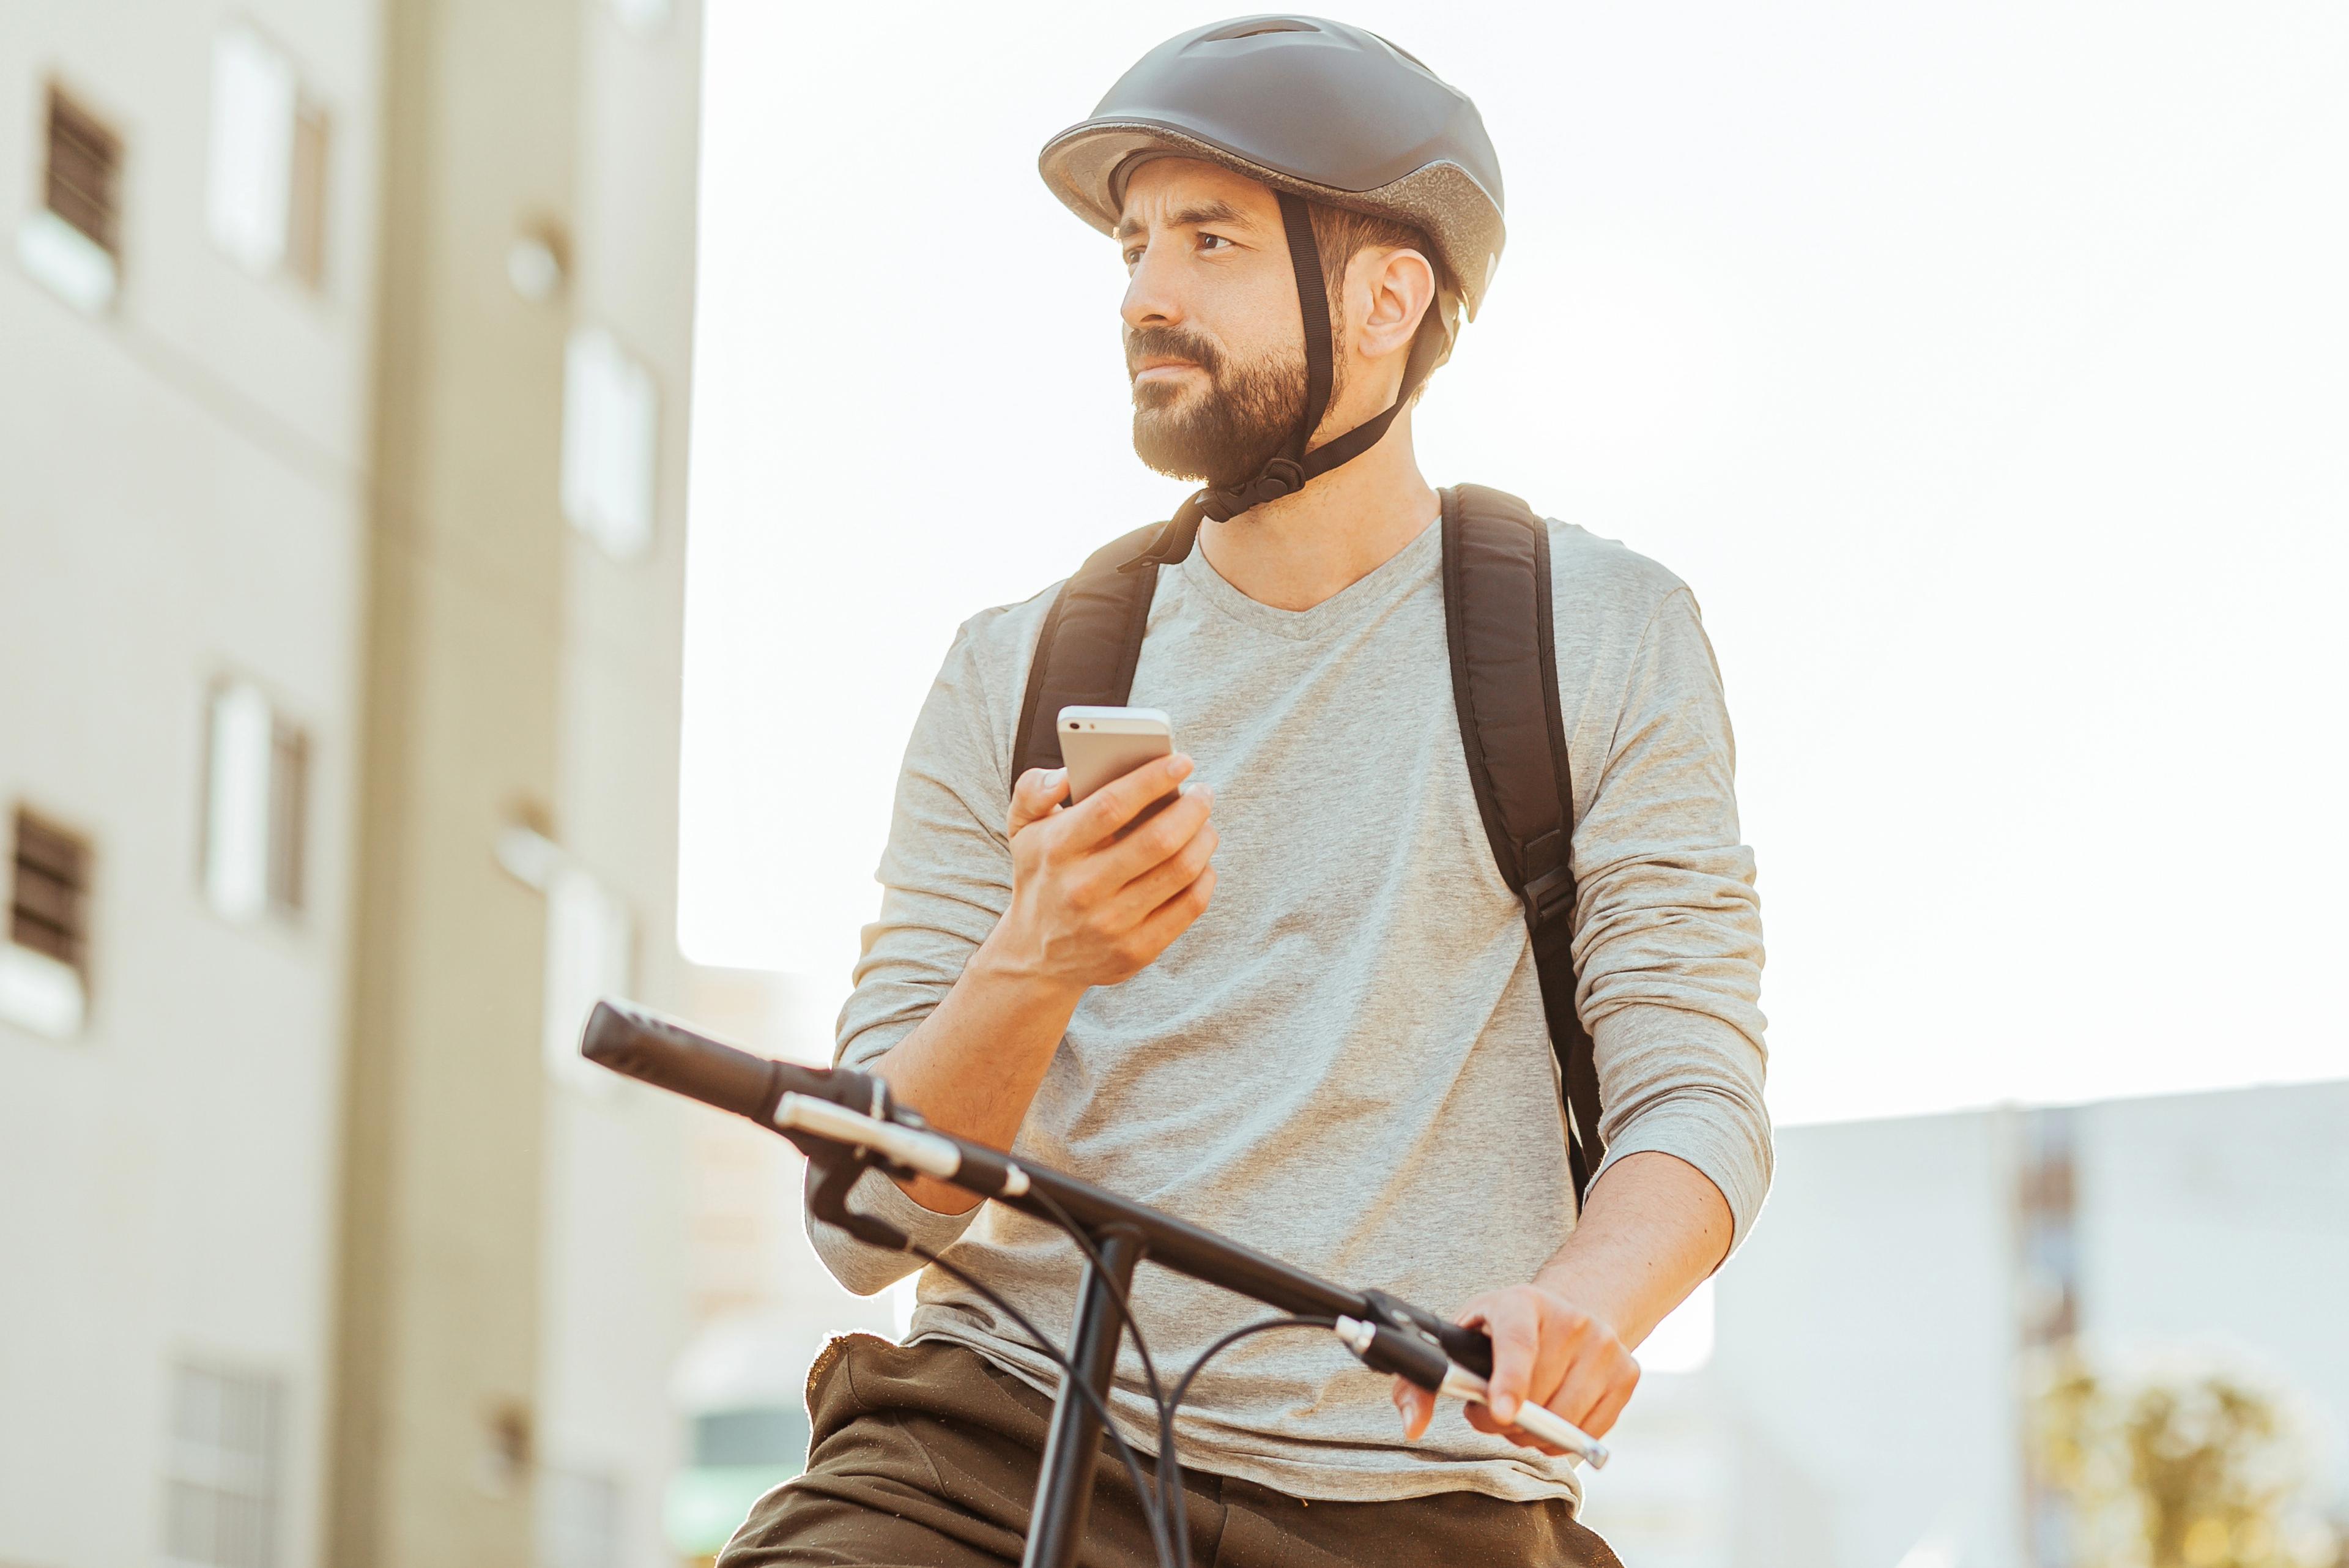 Man on a bicycle using a smartphone for navigation, powered by the Galileo programme